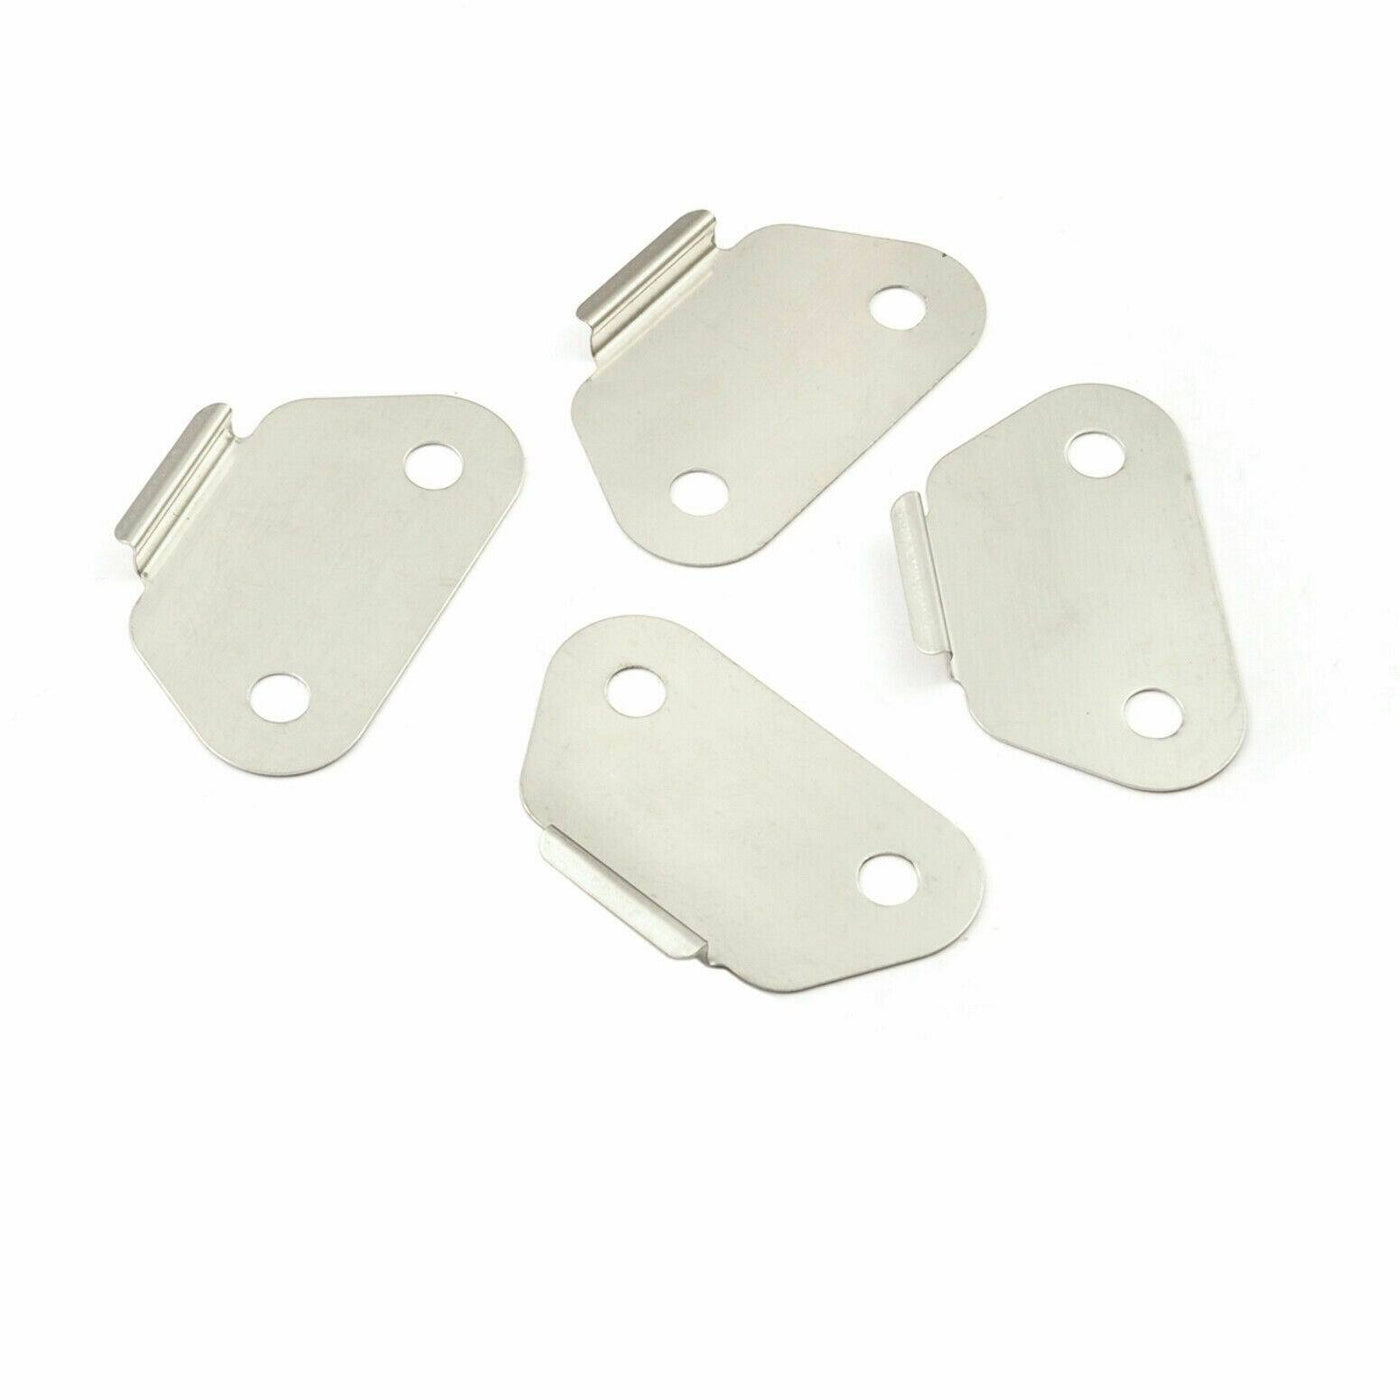 Saddlebags Lid Wear Strike Plates Kit Fit for Harley Road Electra Glide 1993-13 - Moto Life Products